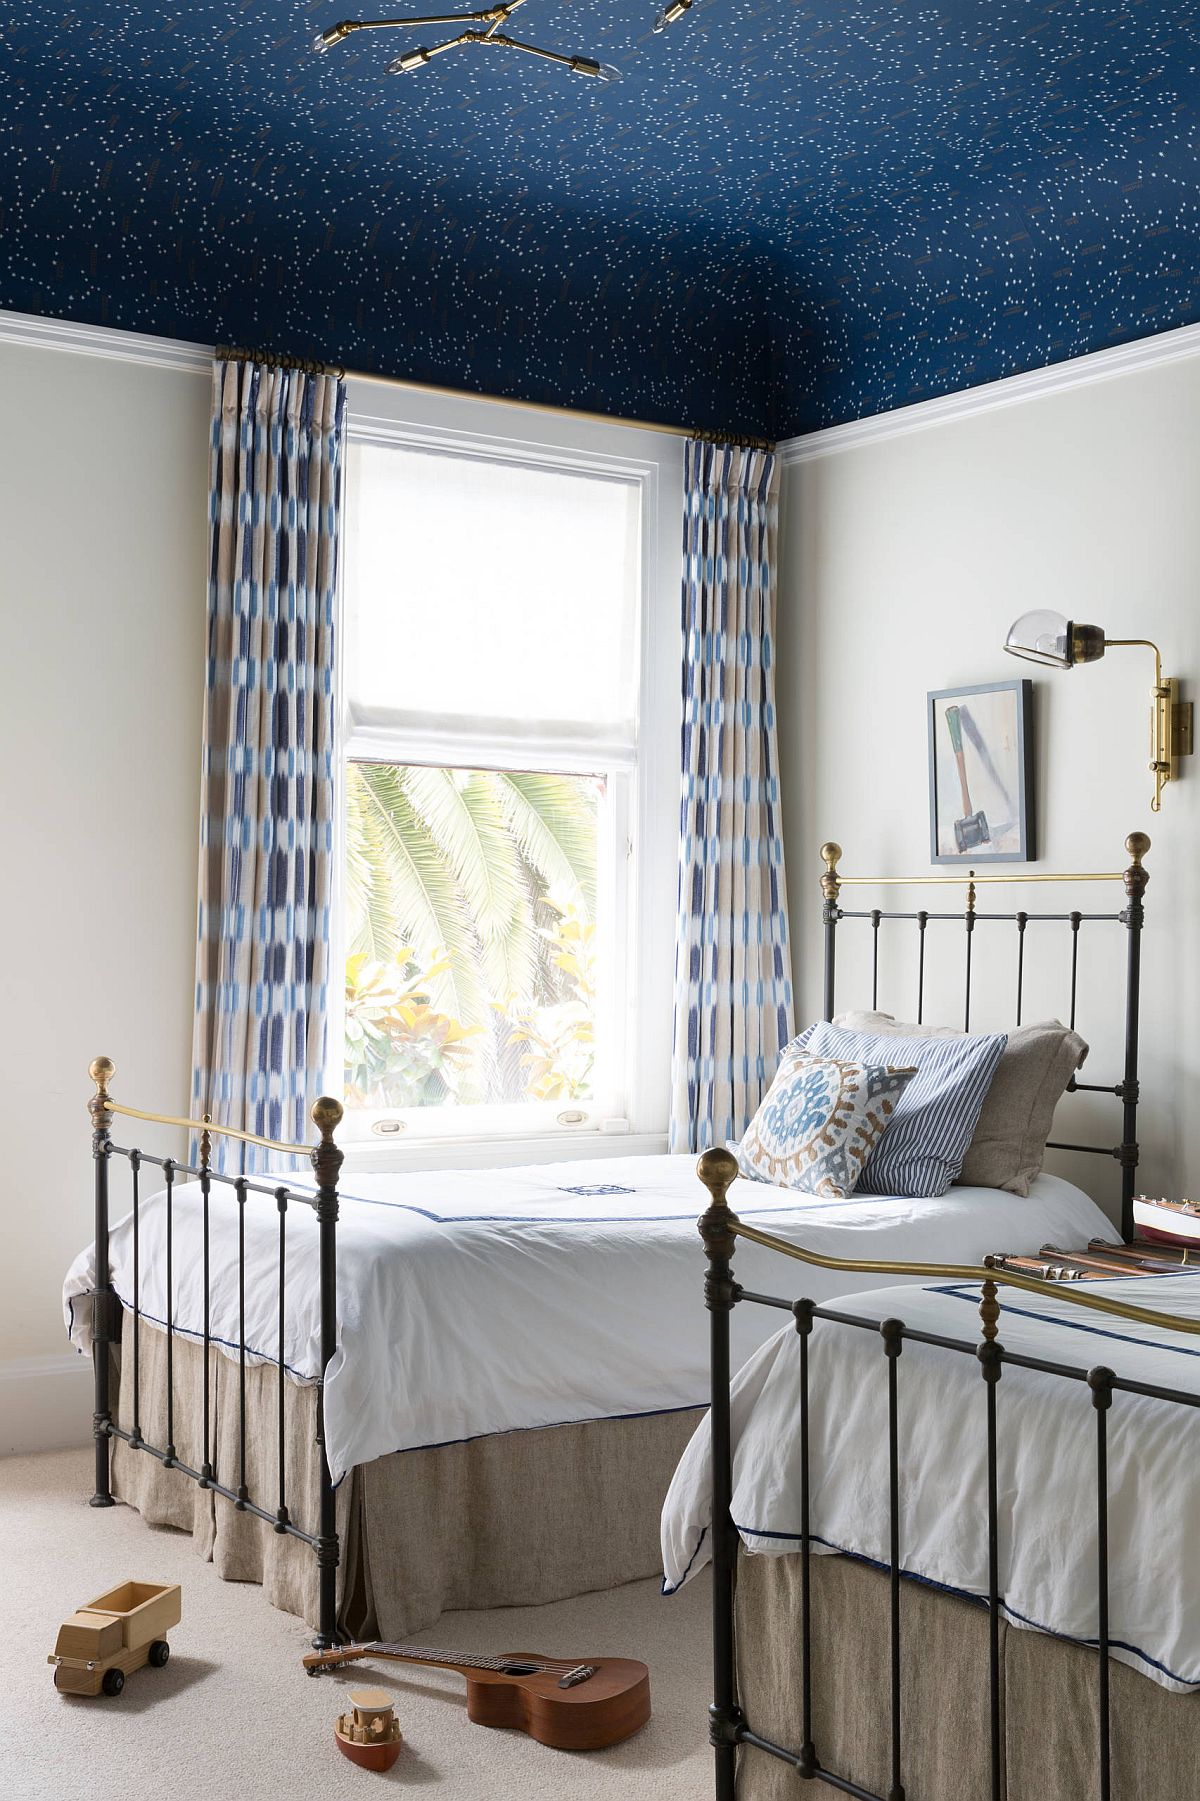 Dashing dark blue wallpaper on the ceiling adds bright color to this kids' bedroom